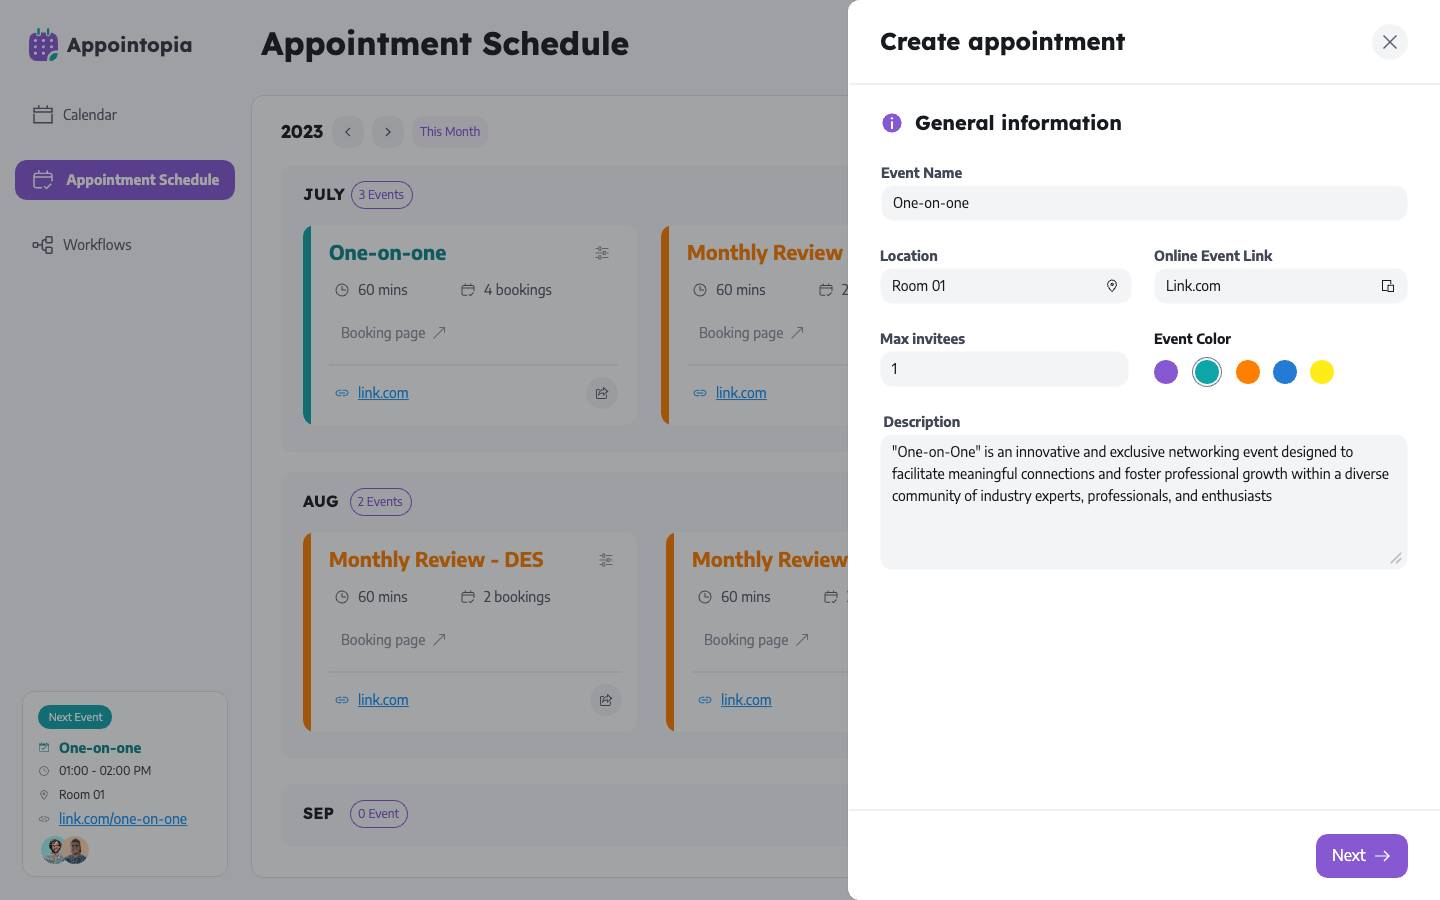 Create an appointment - General information